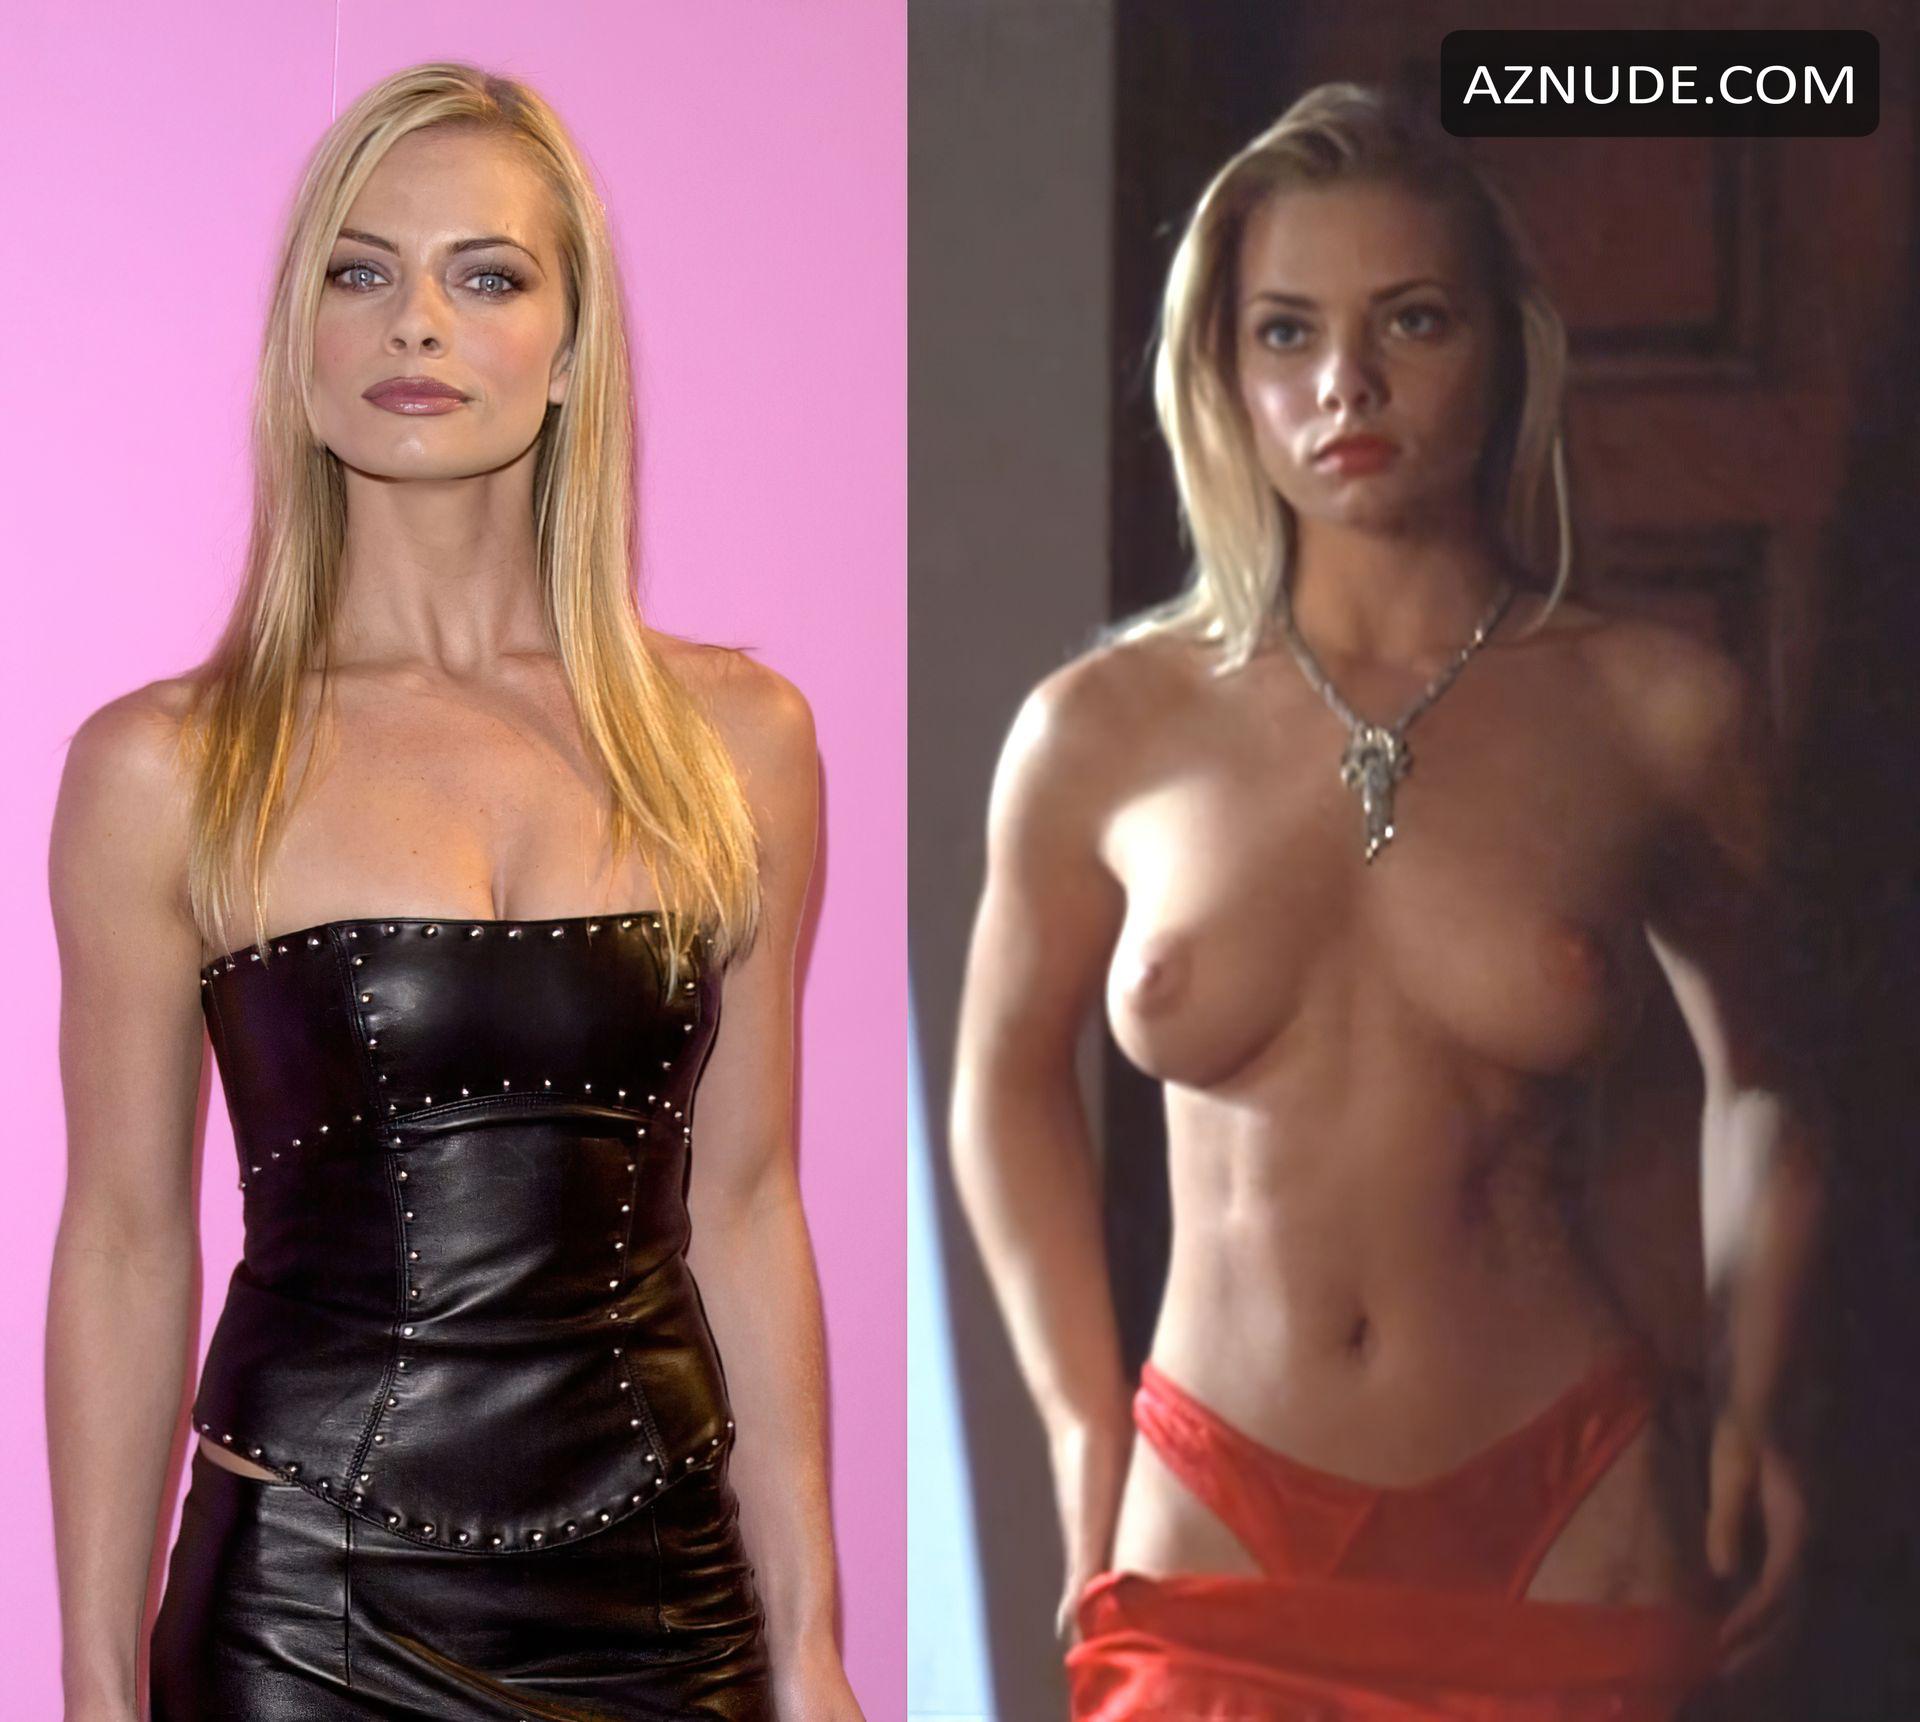 bridget keen recommends jaime pressly nude gallery pic